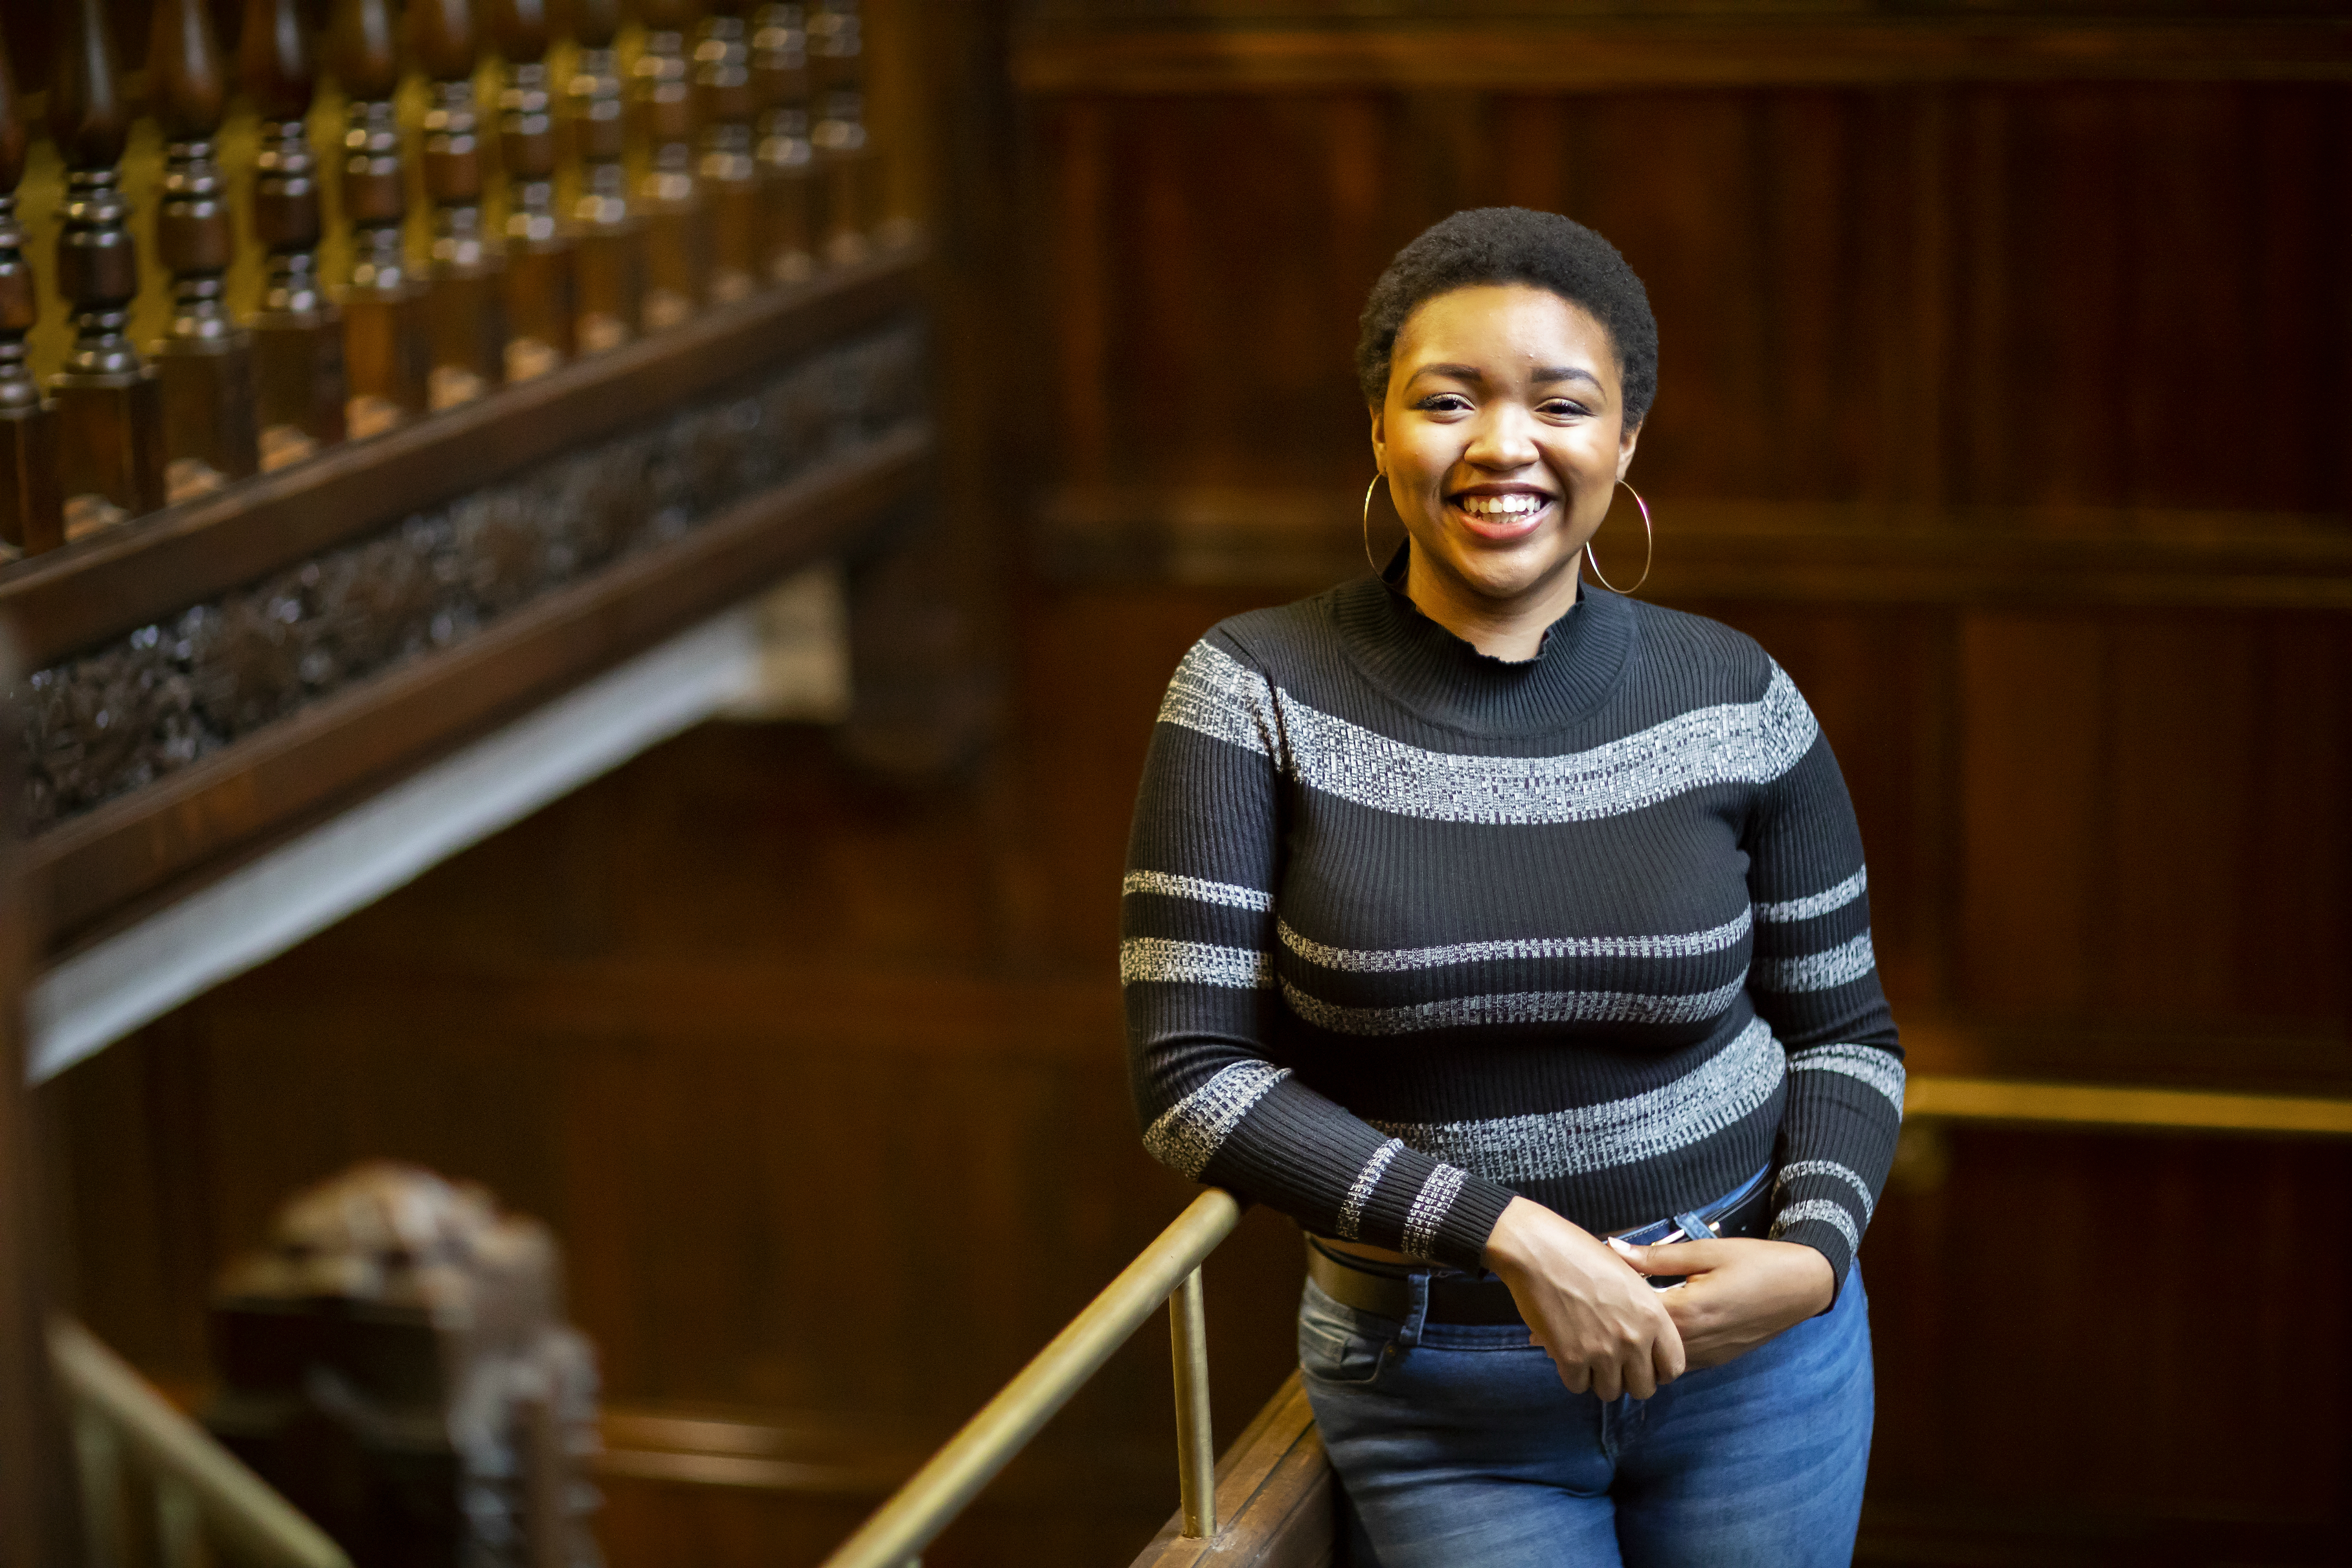 Anea Moore is a senior at the University of Pennsylvania and a Class of 2019 Rhodes Scholar.